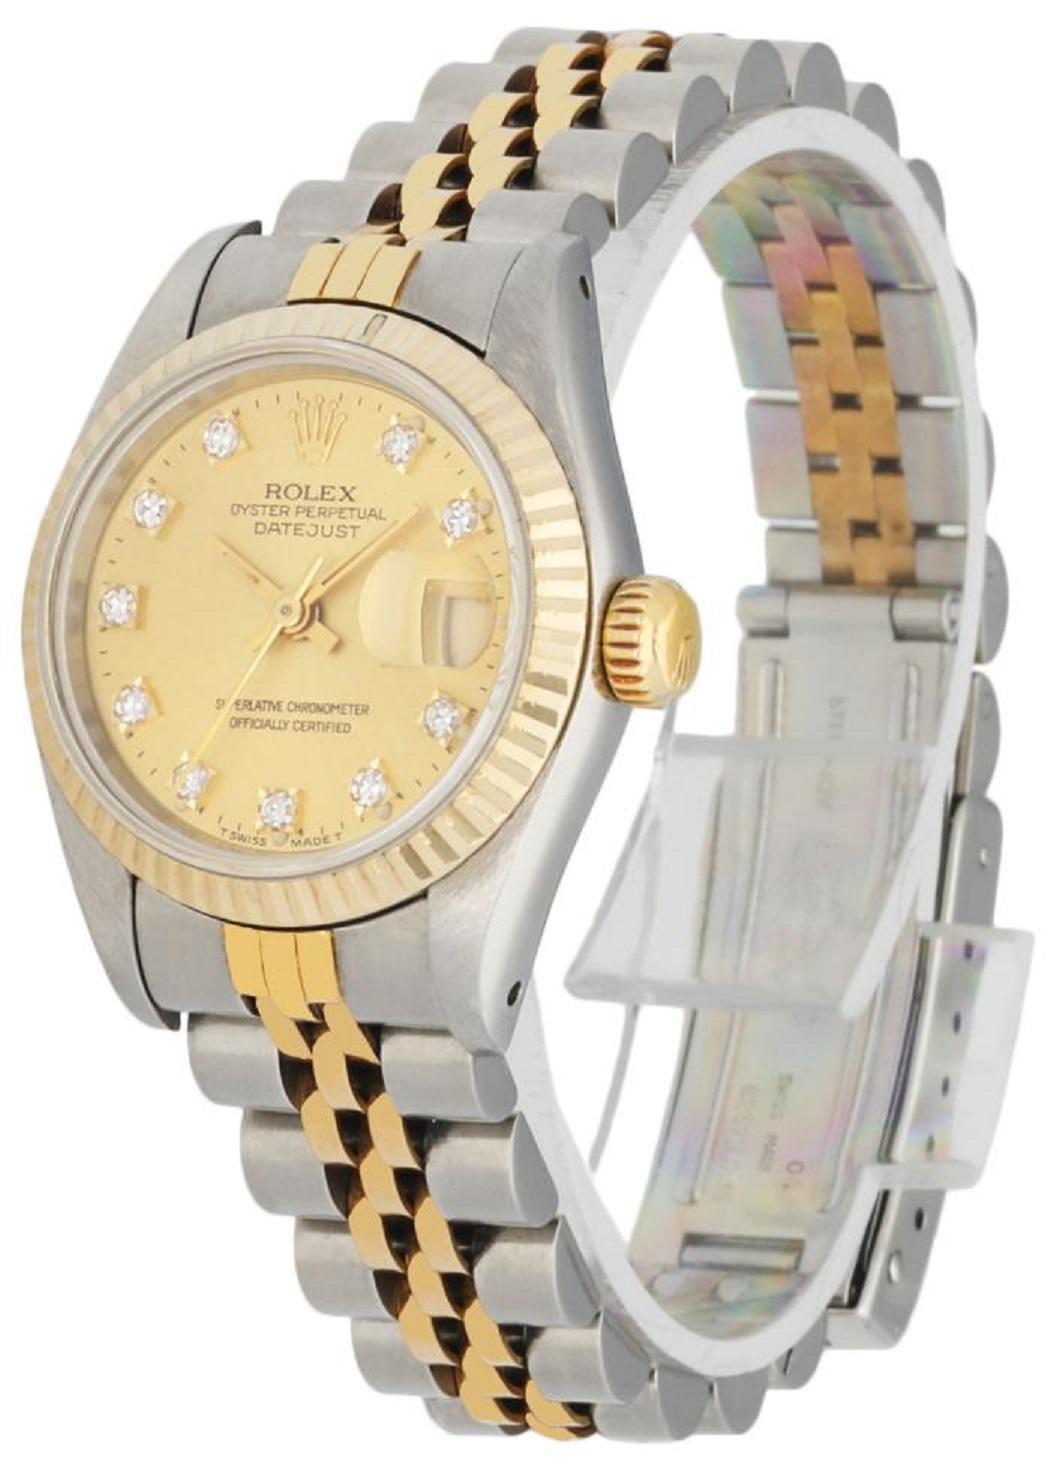 Rolex Oyster Perpetual Datejust 69173 Ladies watch. 26mm stainless steel case. 18k yellow gold fluted bezel. Champagne dial with yellow gold hands and factory diamond hour markers. Magnified date display at 3 o'clock position. 18k yellow gold and